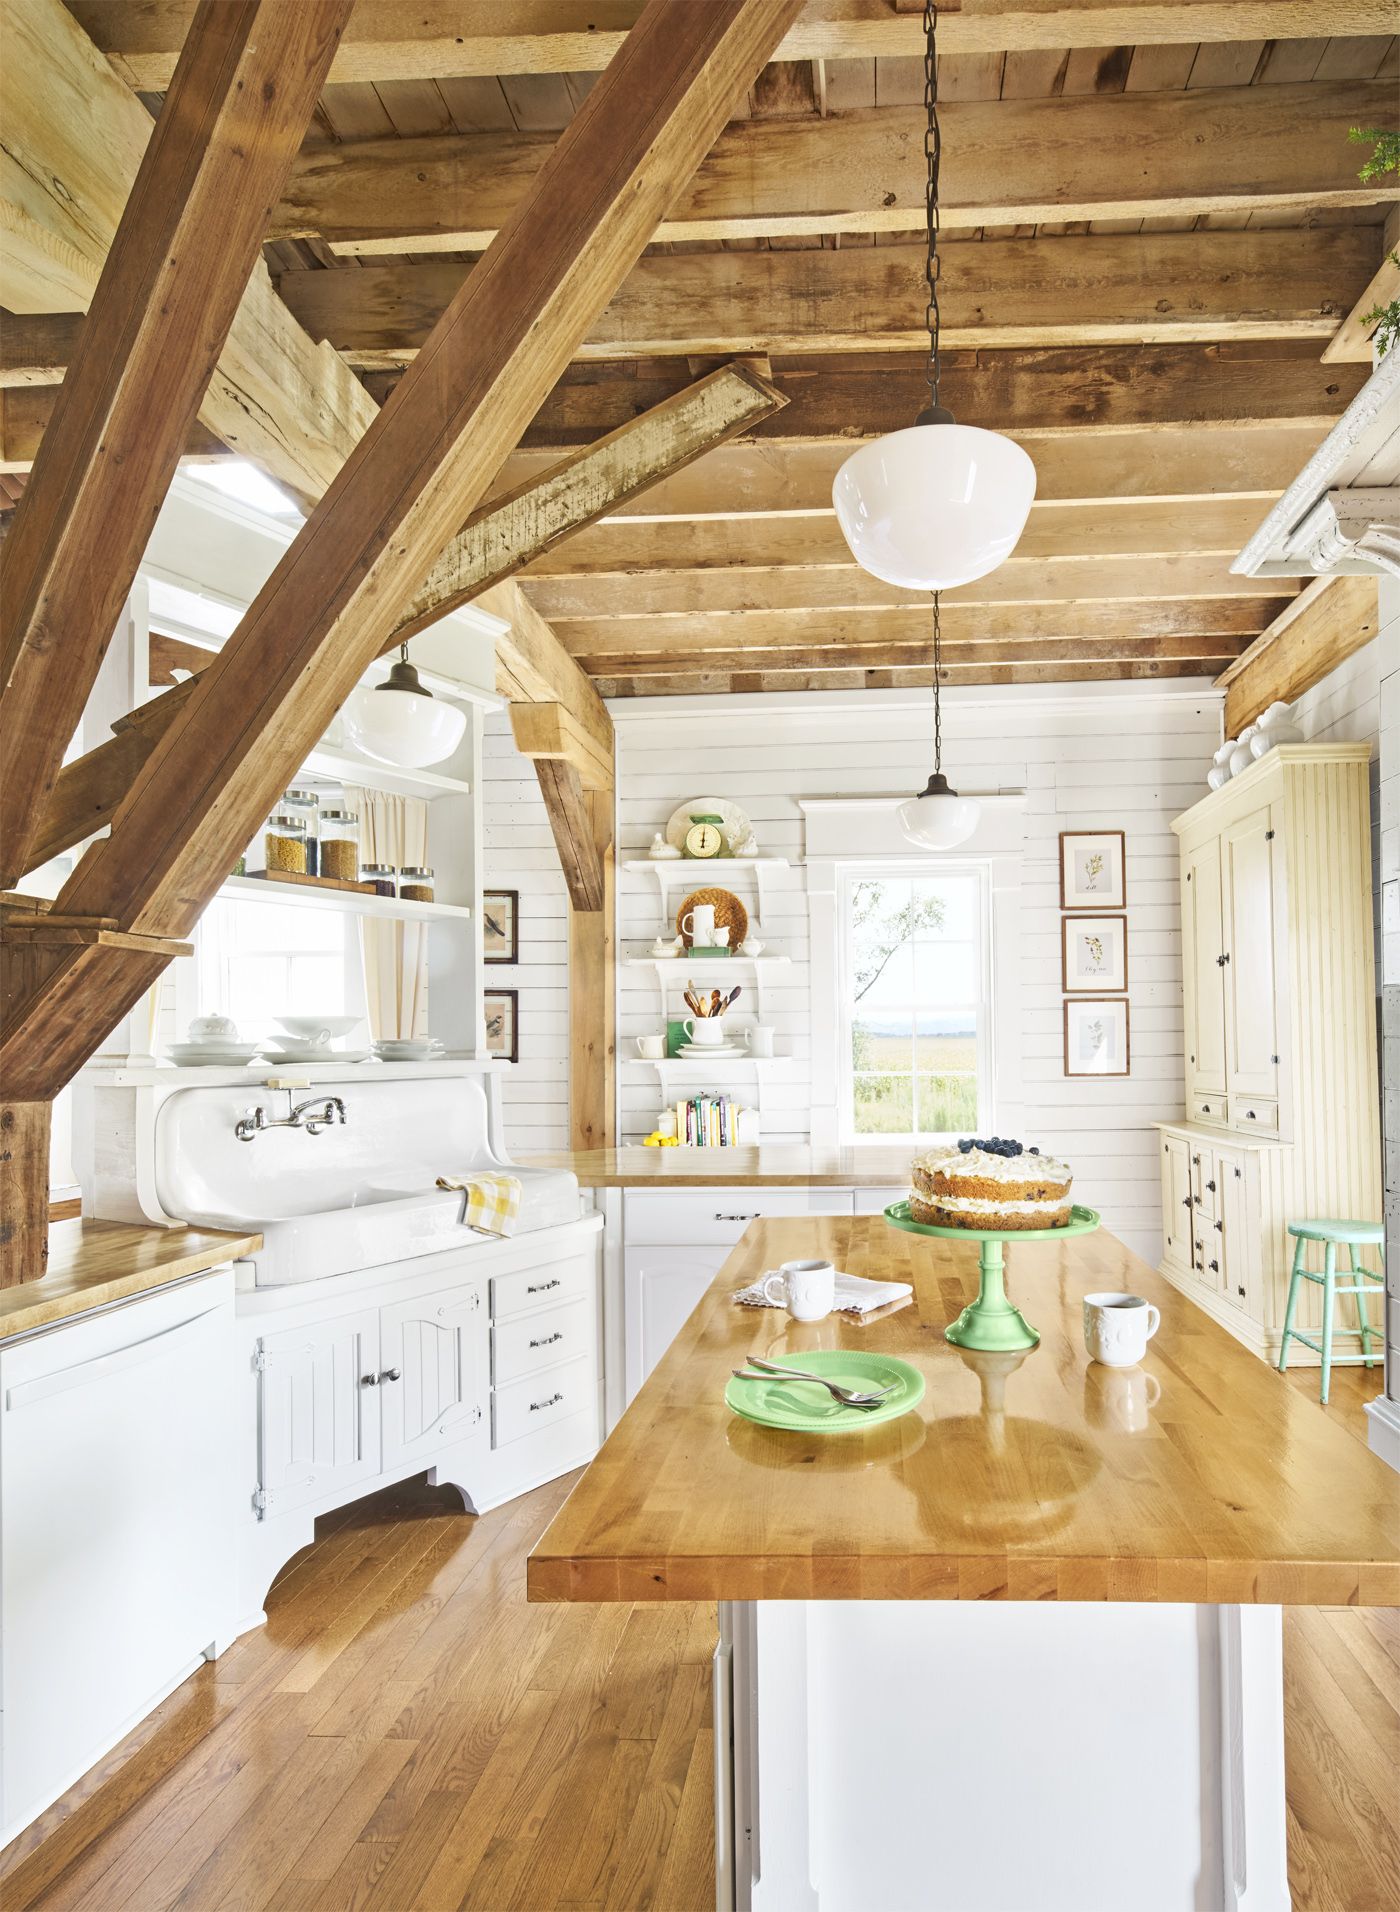 https://hips.hearstapps.com/countryliving/assets/16/52/let-there-be-white-kitchen-0117.jpg